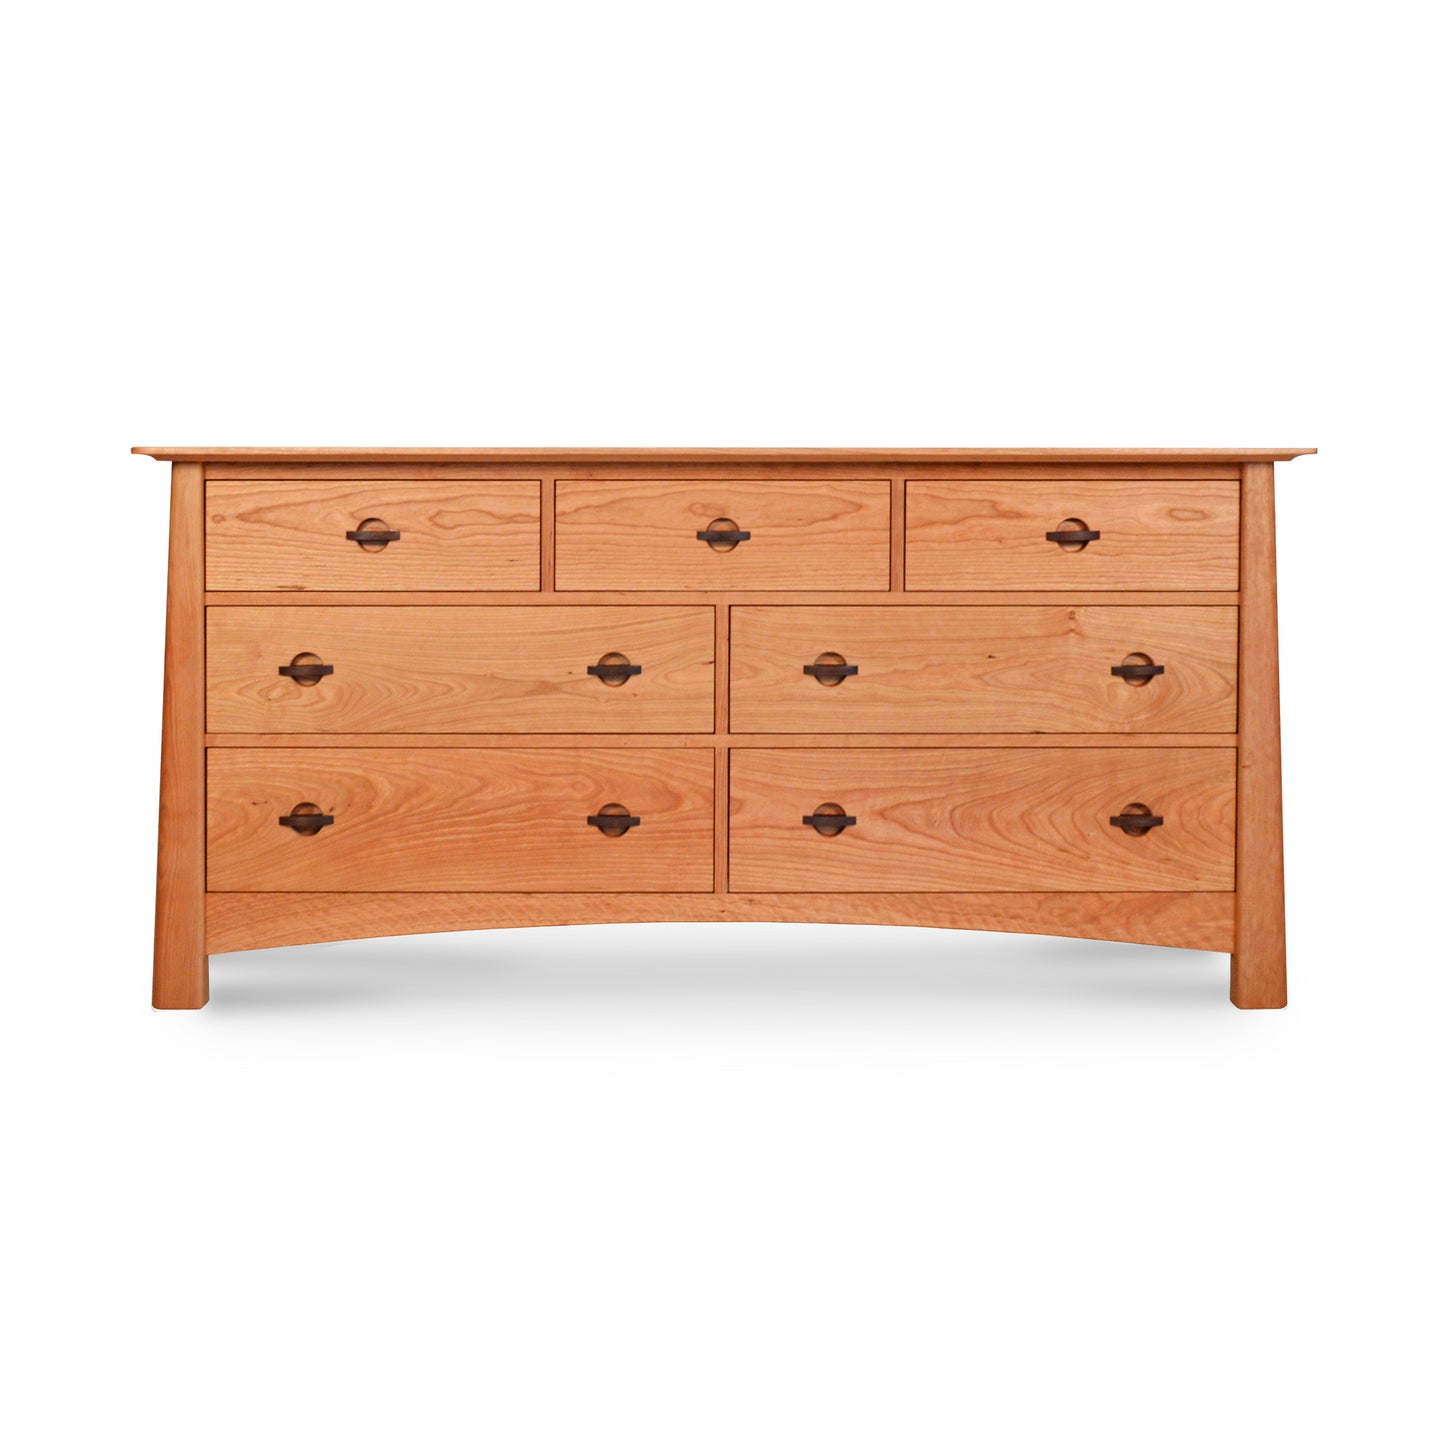 A handmade Cherry Moon 7-Drawer Dresser by Maple Corner Woodworks, each featuring a round knob, displayed against a white background. The dresser has a smooth finish and a slightly curved bottom edge.